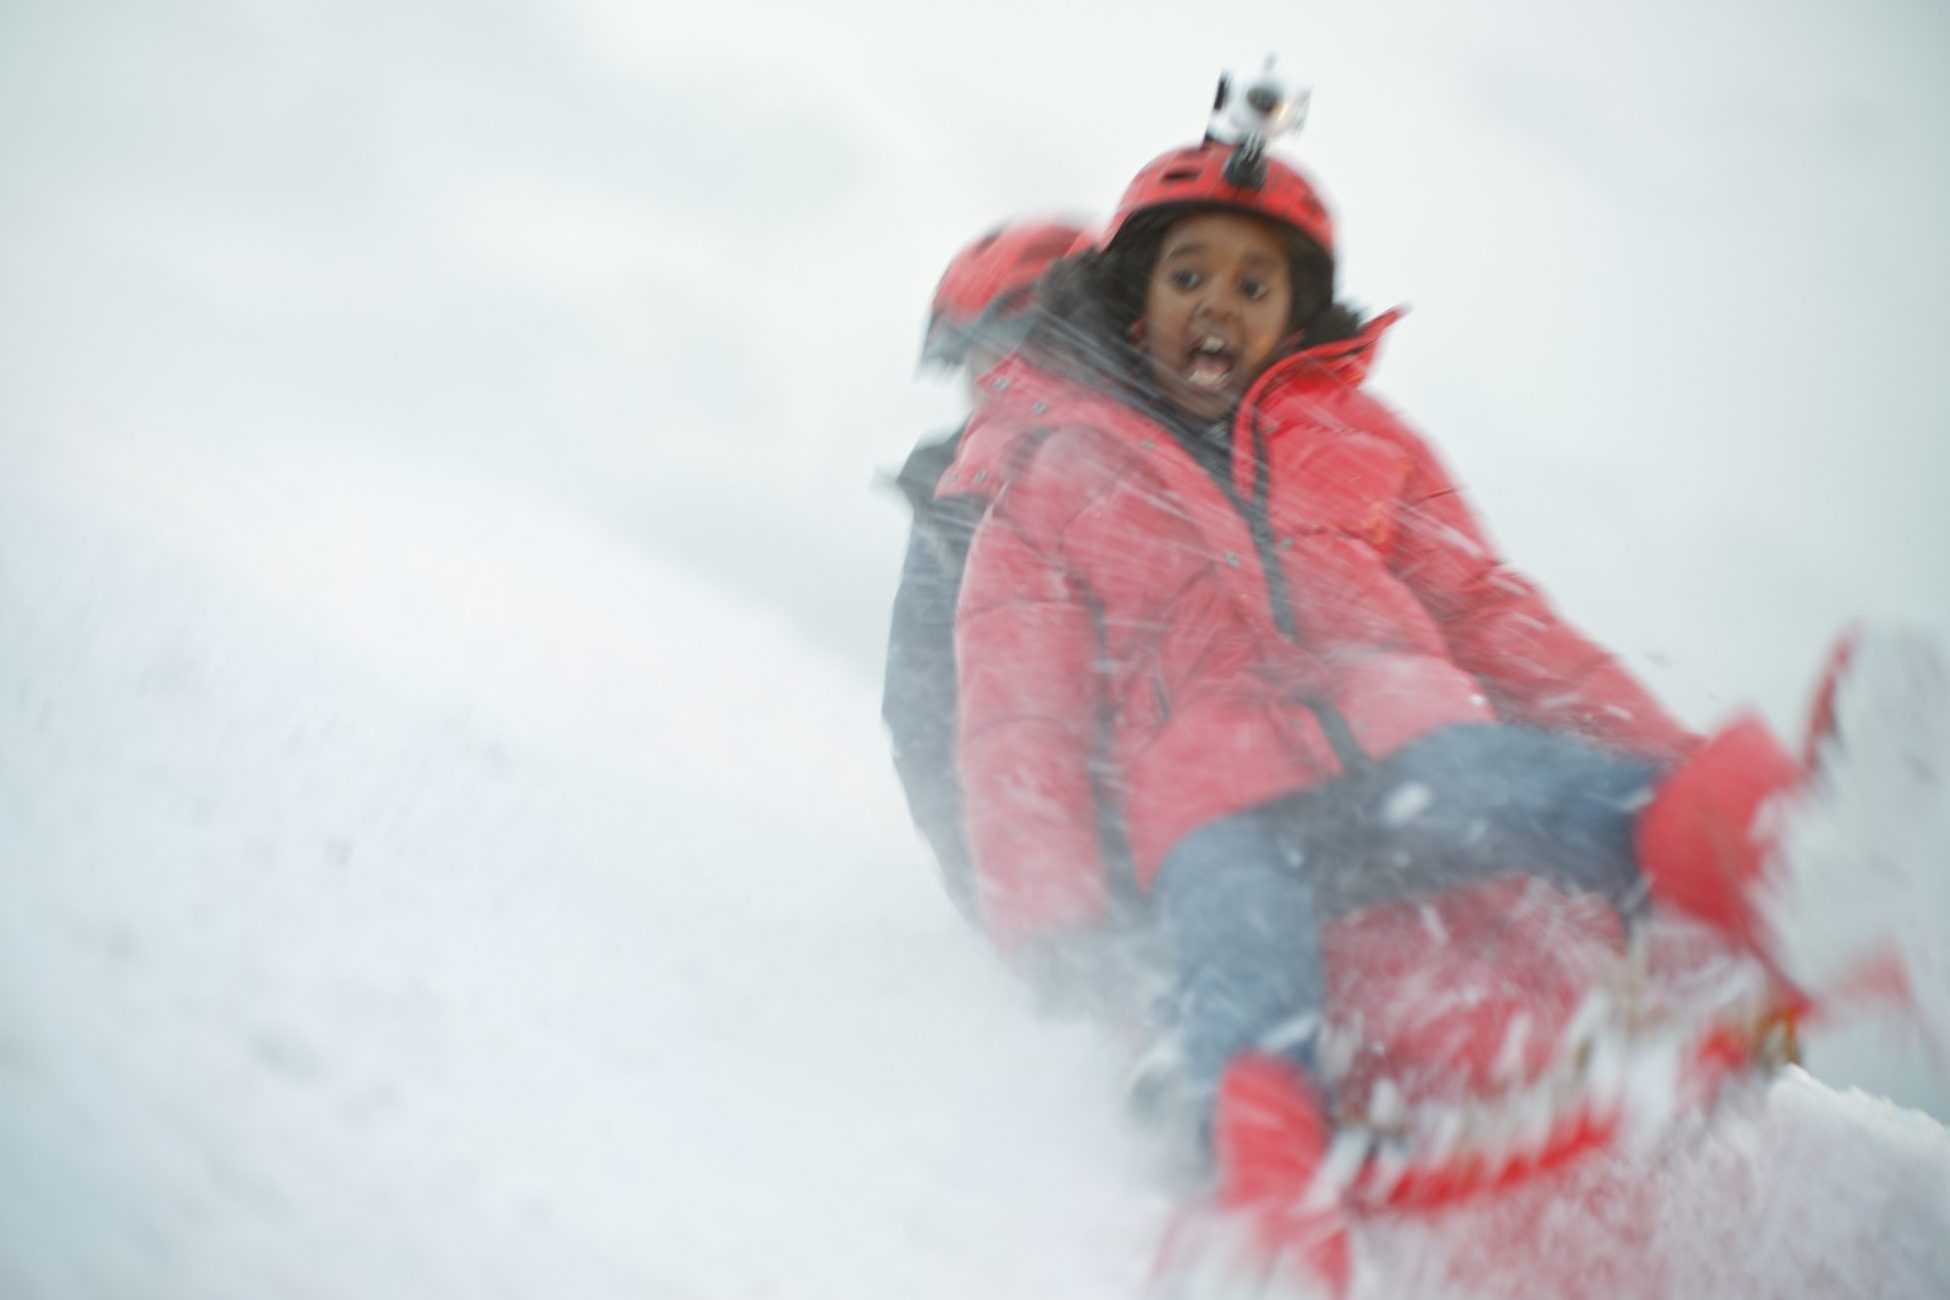 Vodafone Christmas Campaign: Sledging